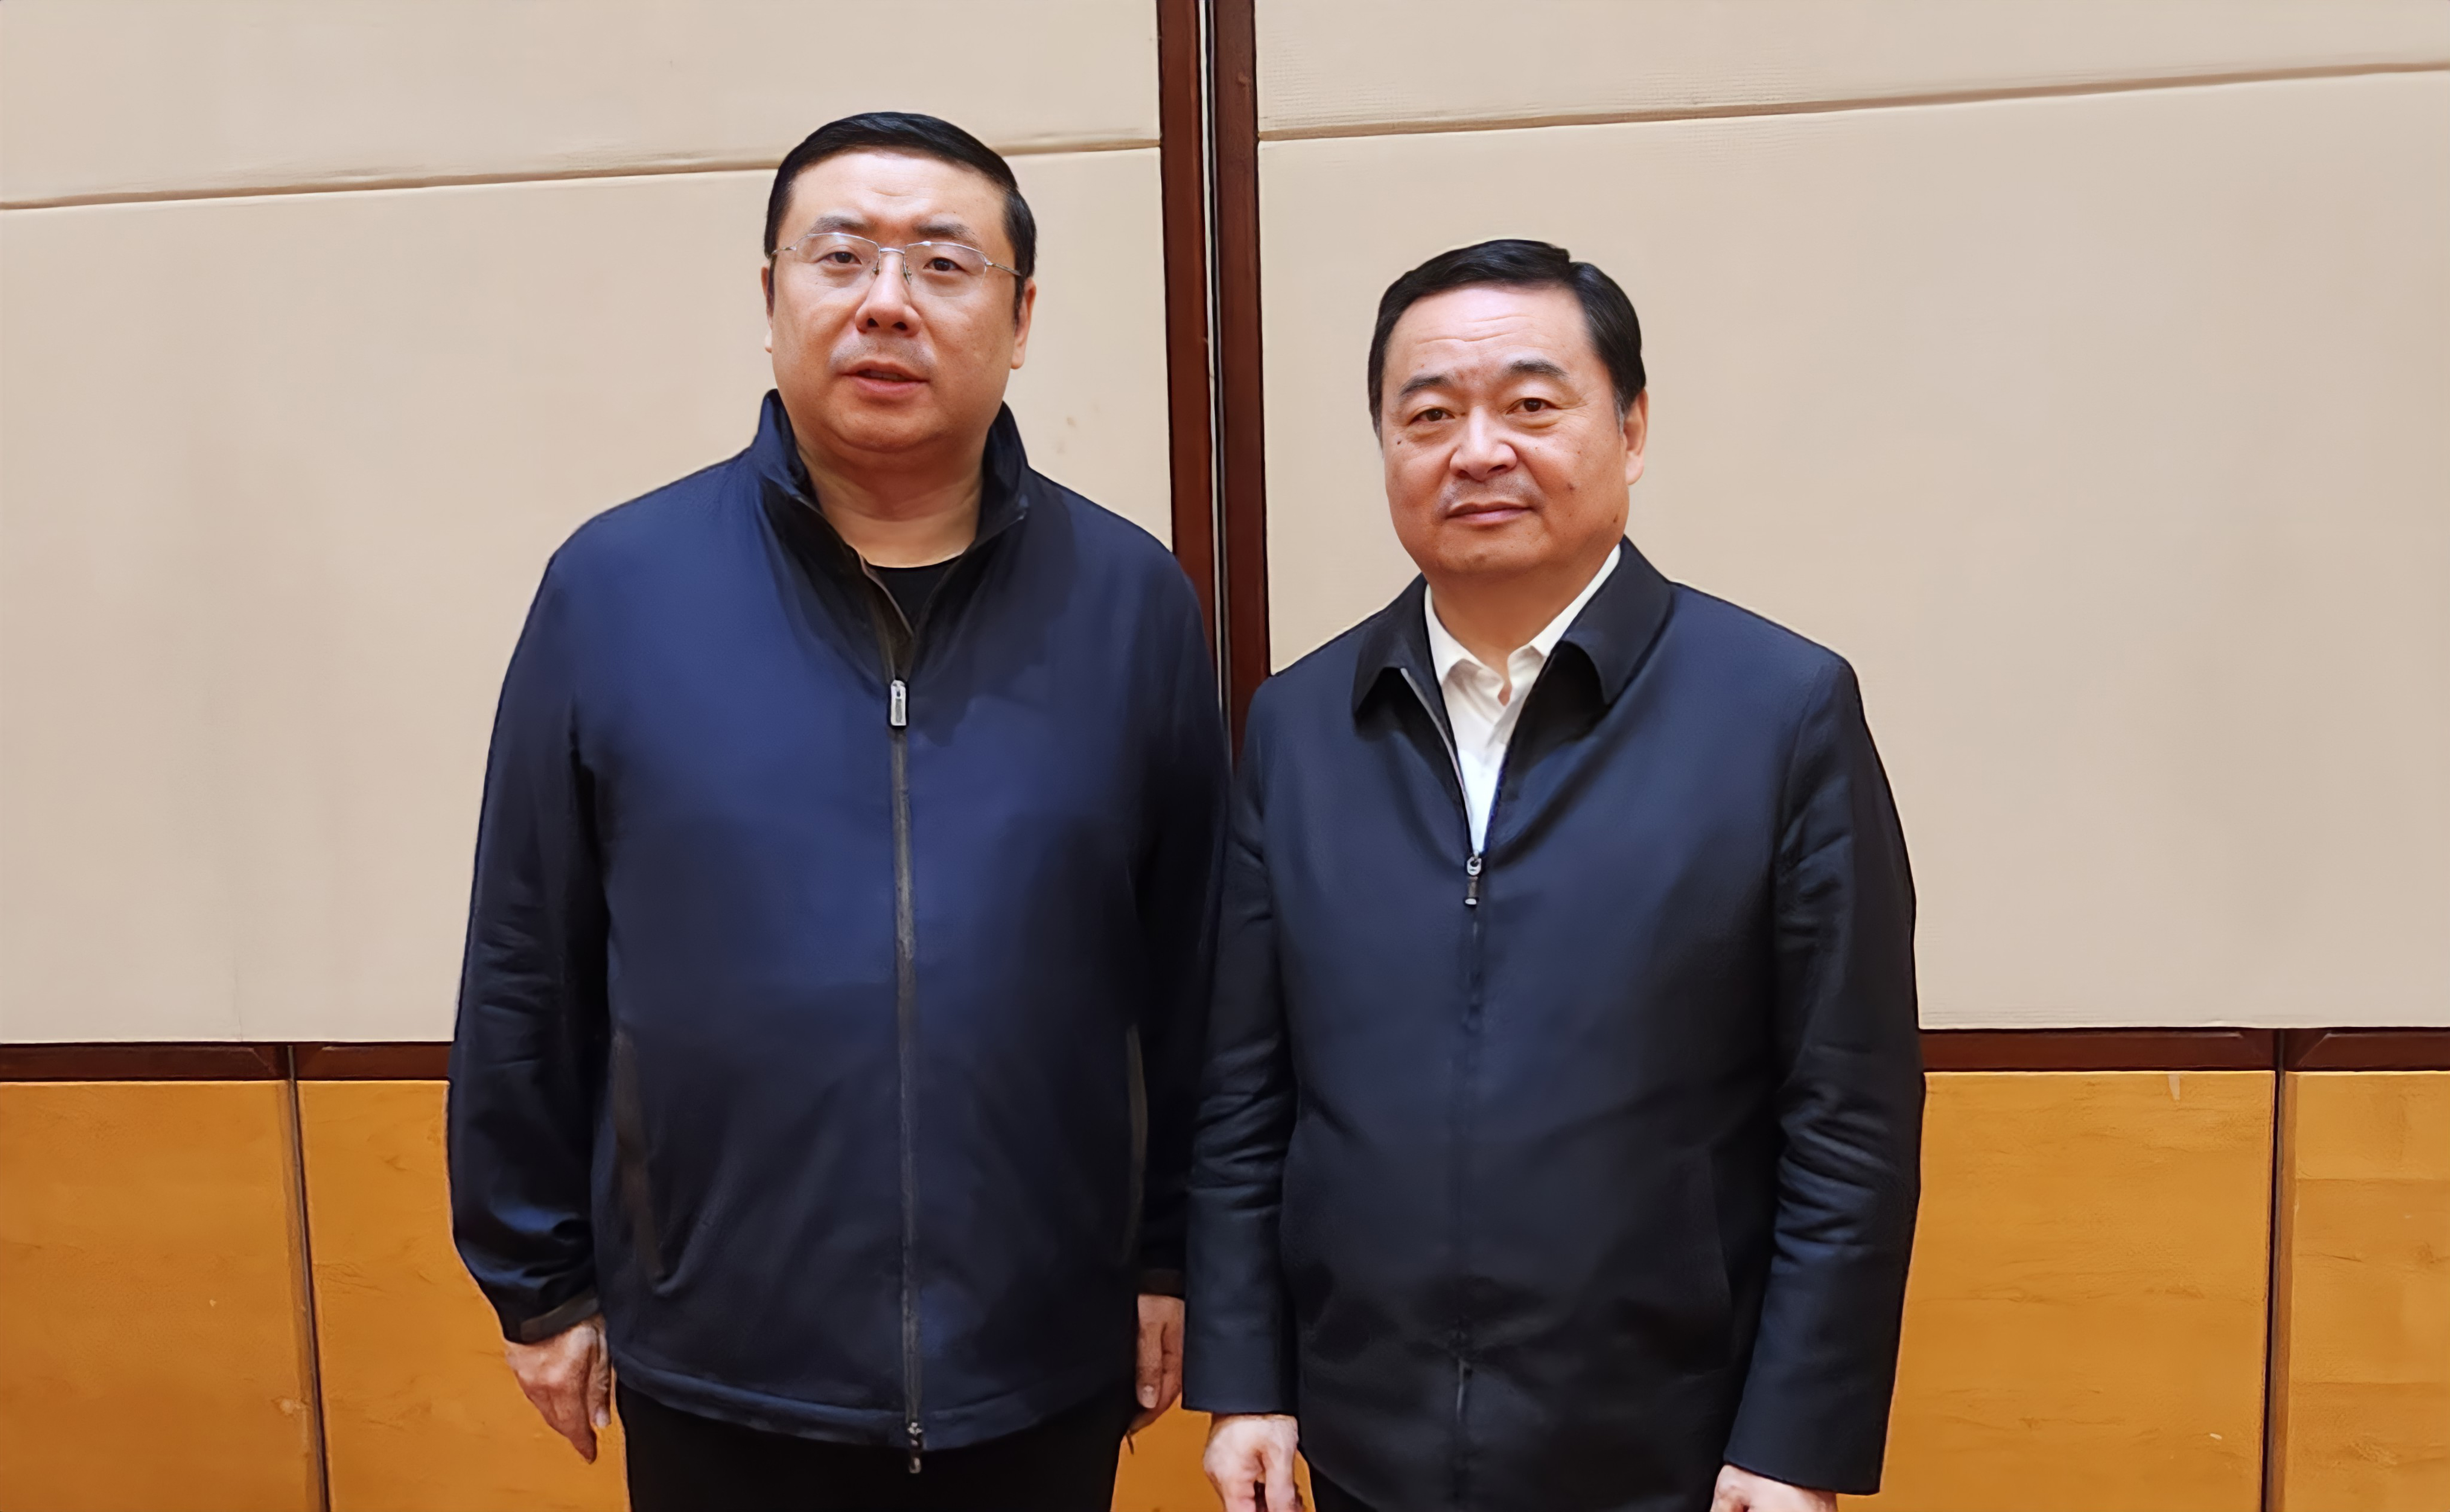 Chairman Li Yong took a photo with Hao Peng, the Secretary of the CPC Liaoning Provincial Committee